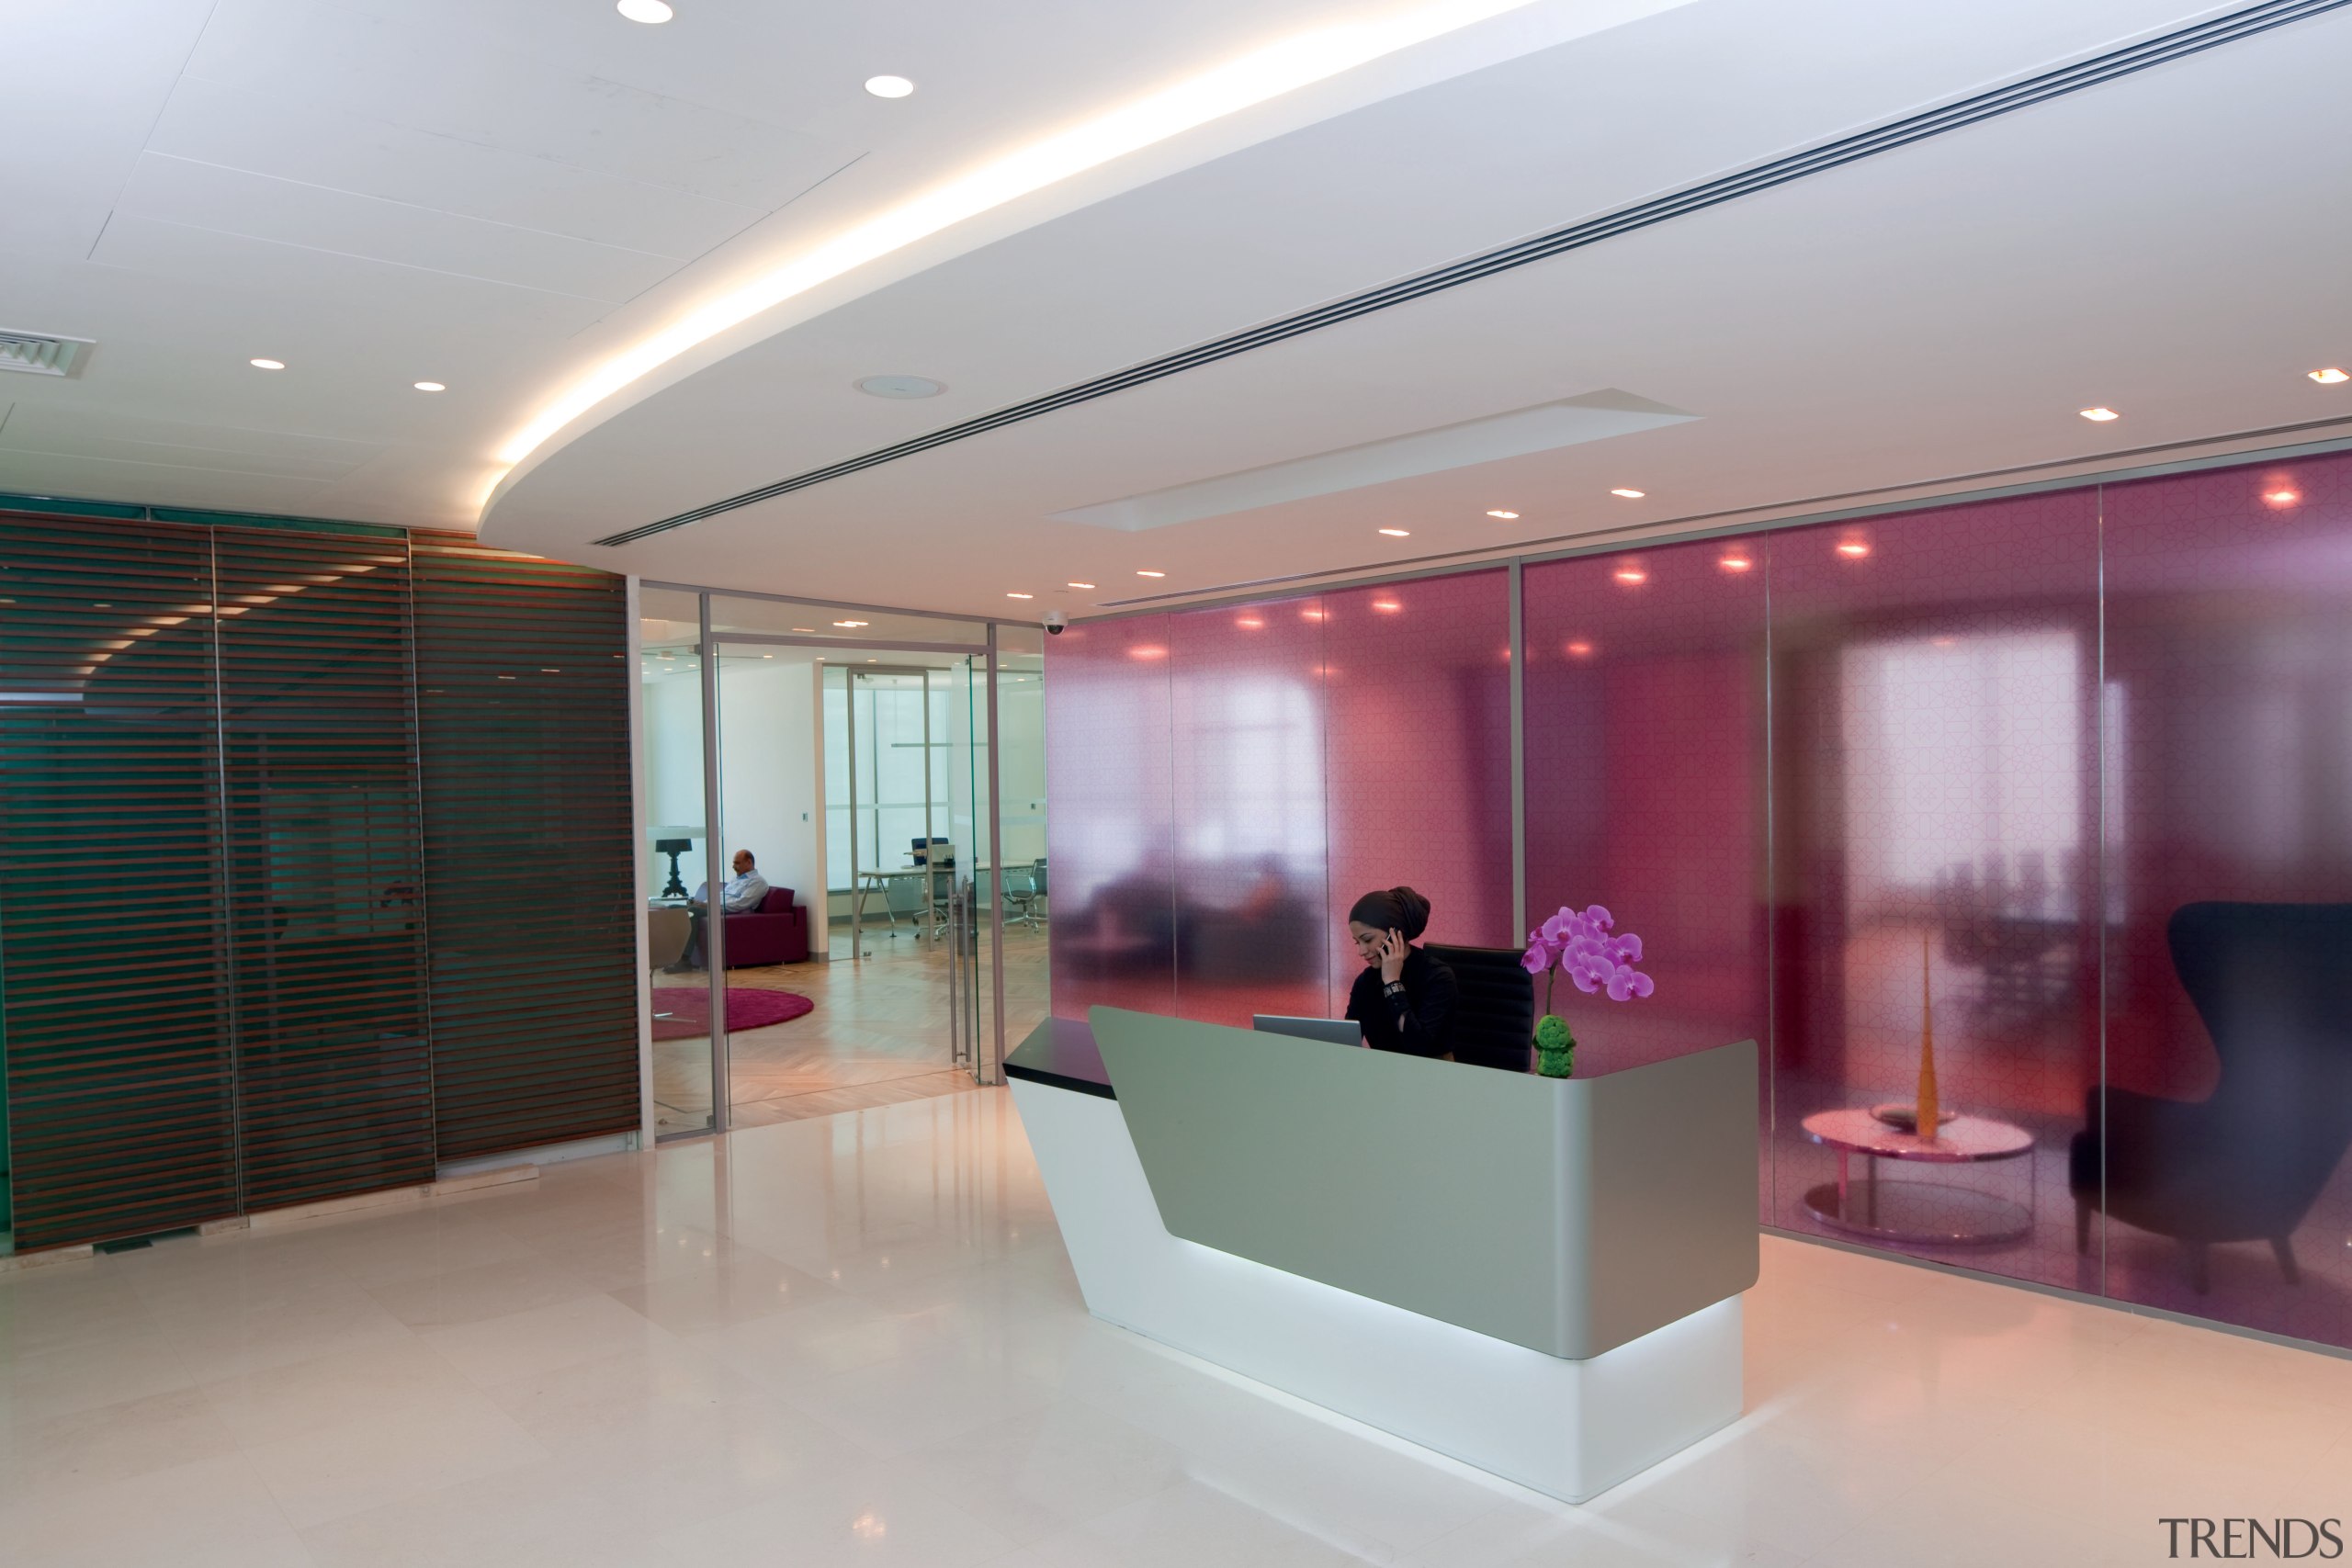 The new Zain headquarters in Bahrain reflects the ceiling, glass, interior design, lobby, gray